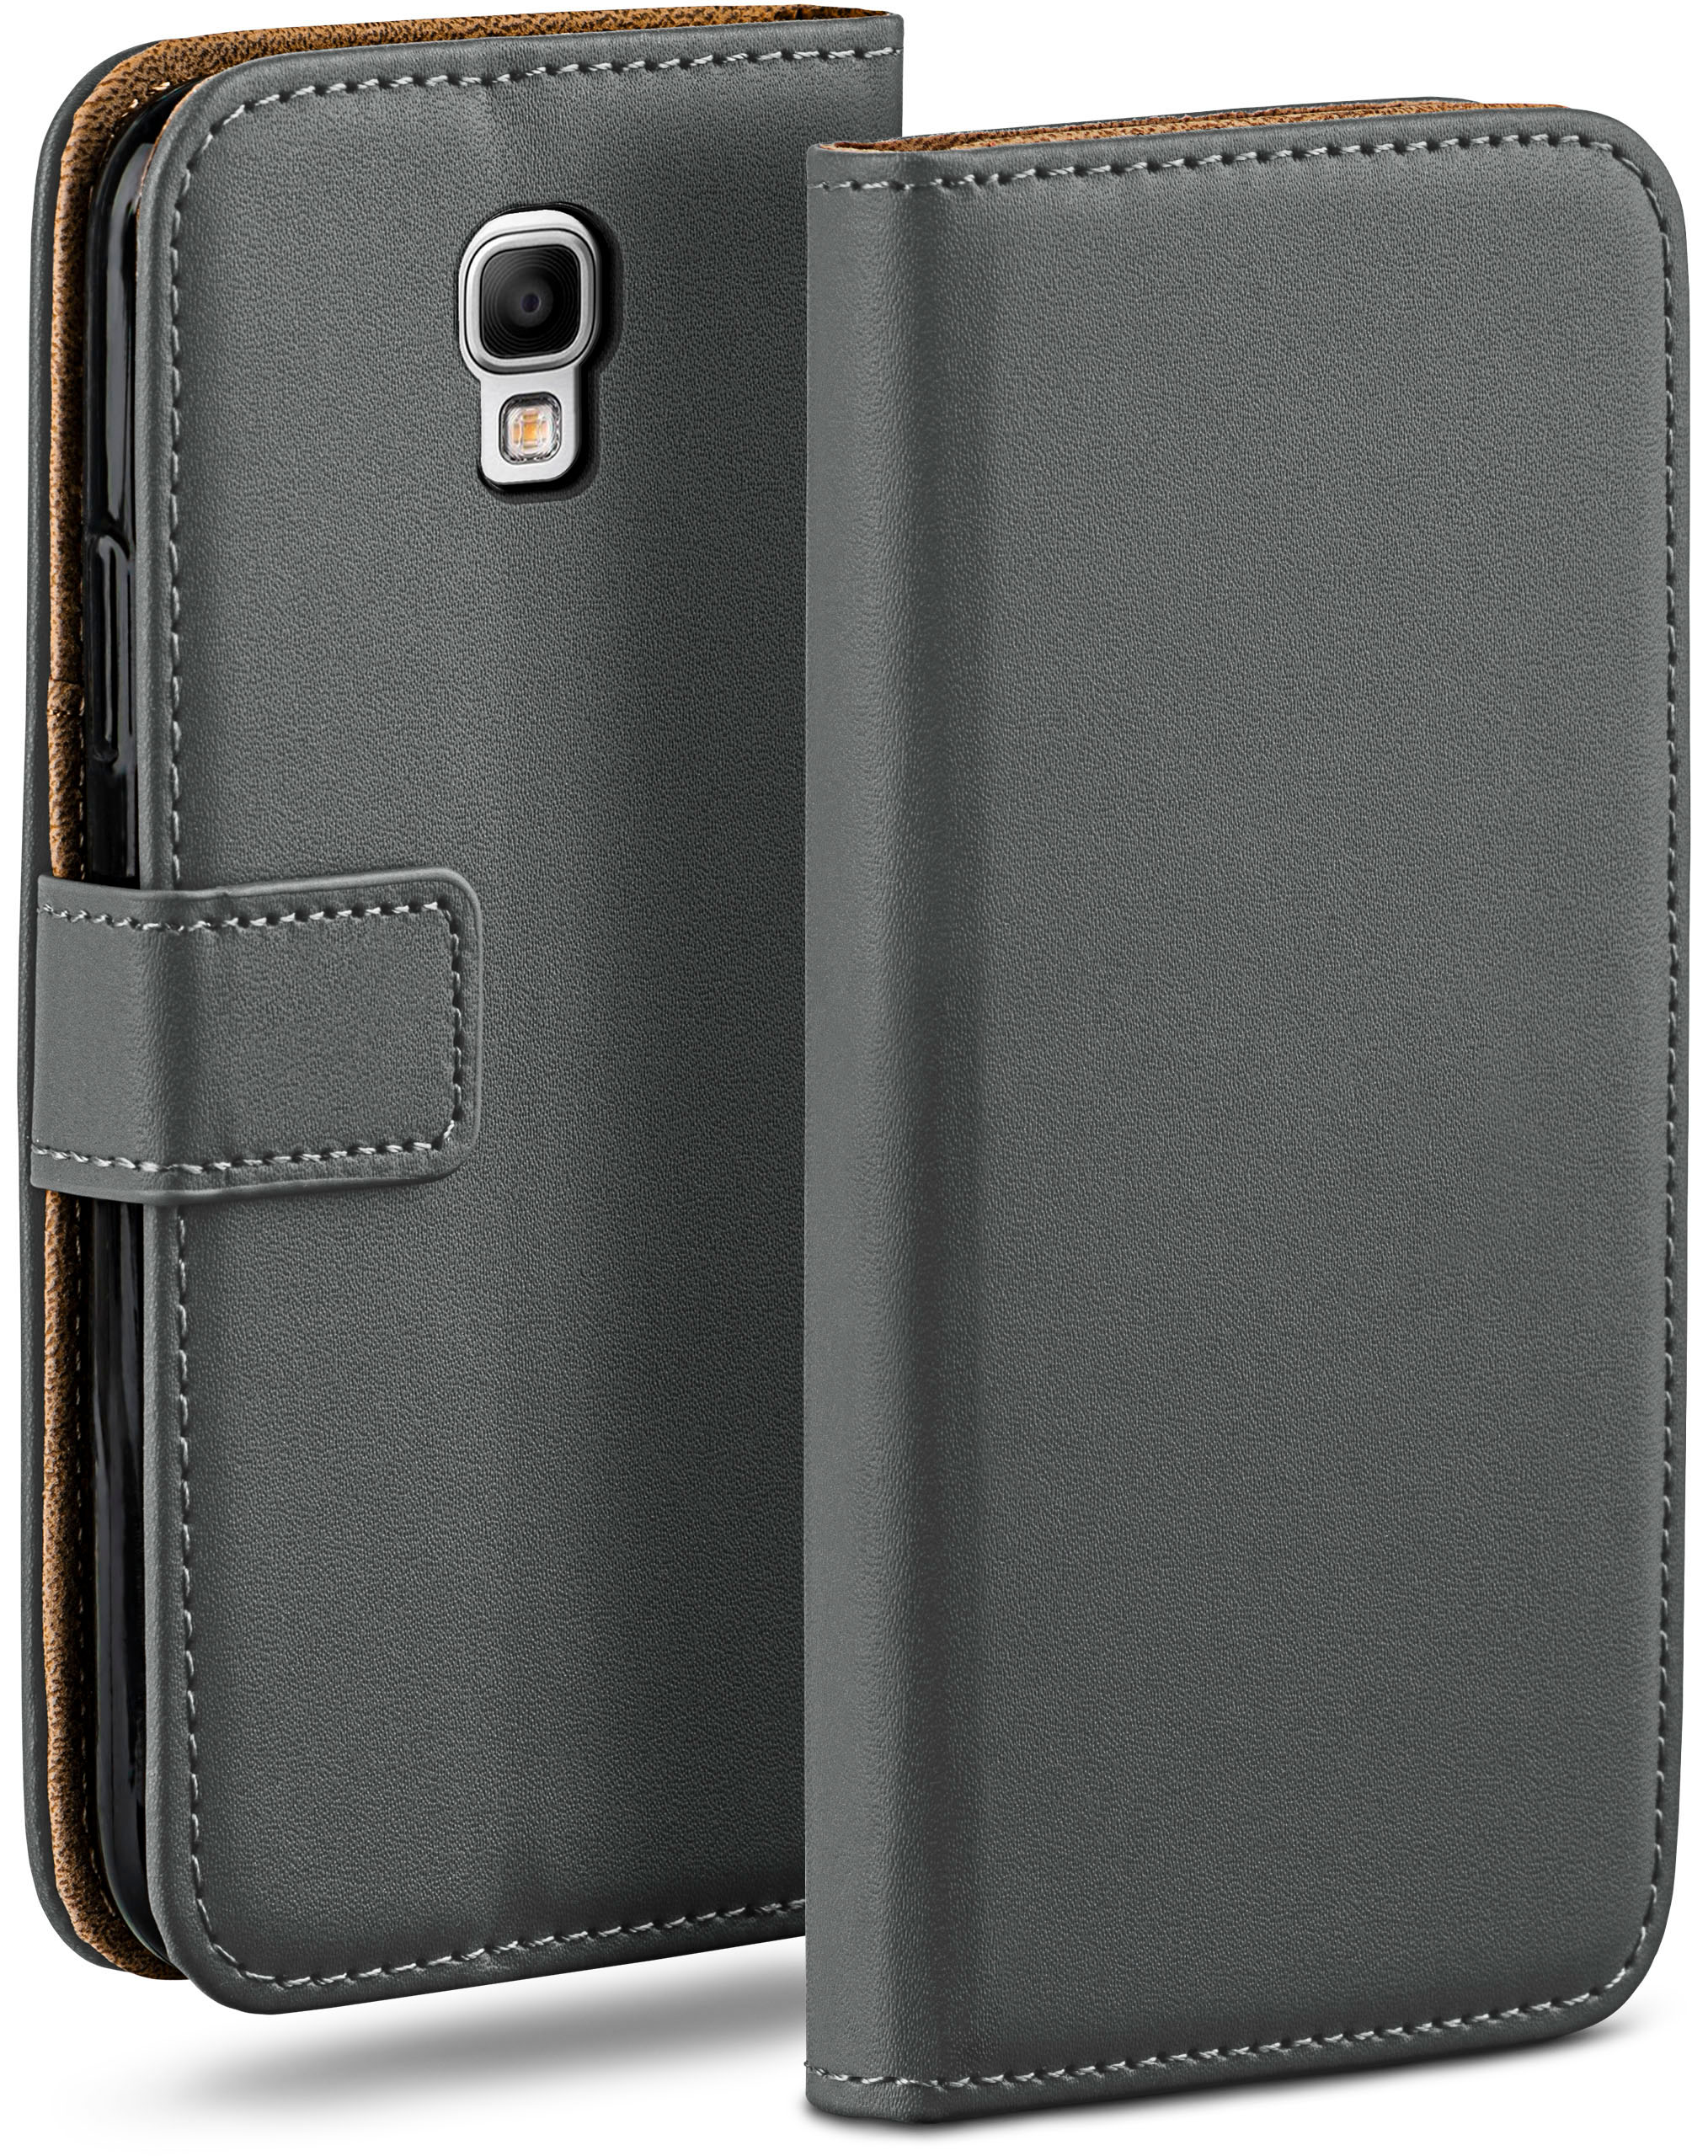 MOEX Book Case, Samsung, Neo, Bookcover, Note 3 Anthracite-Gray Galaxy